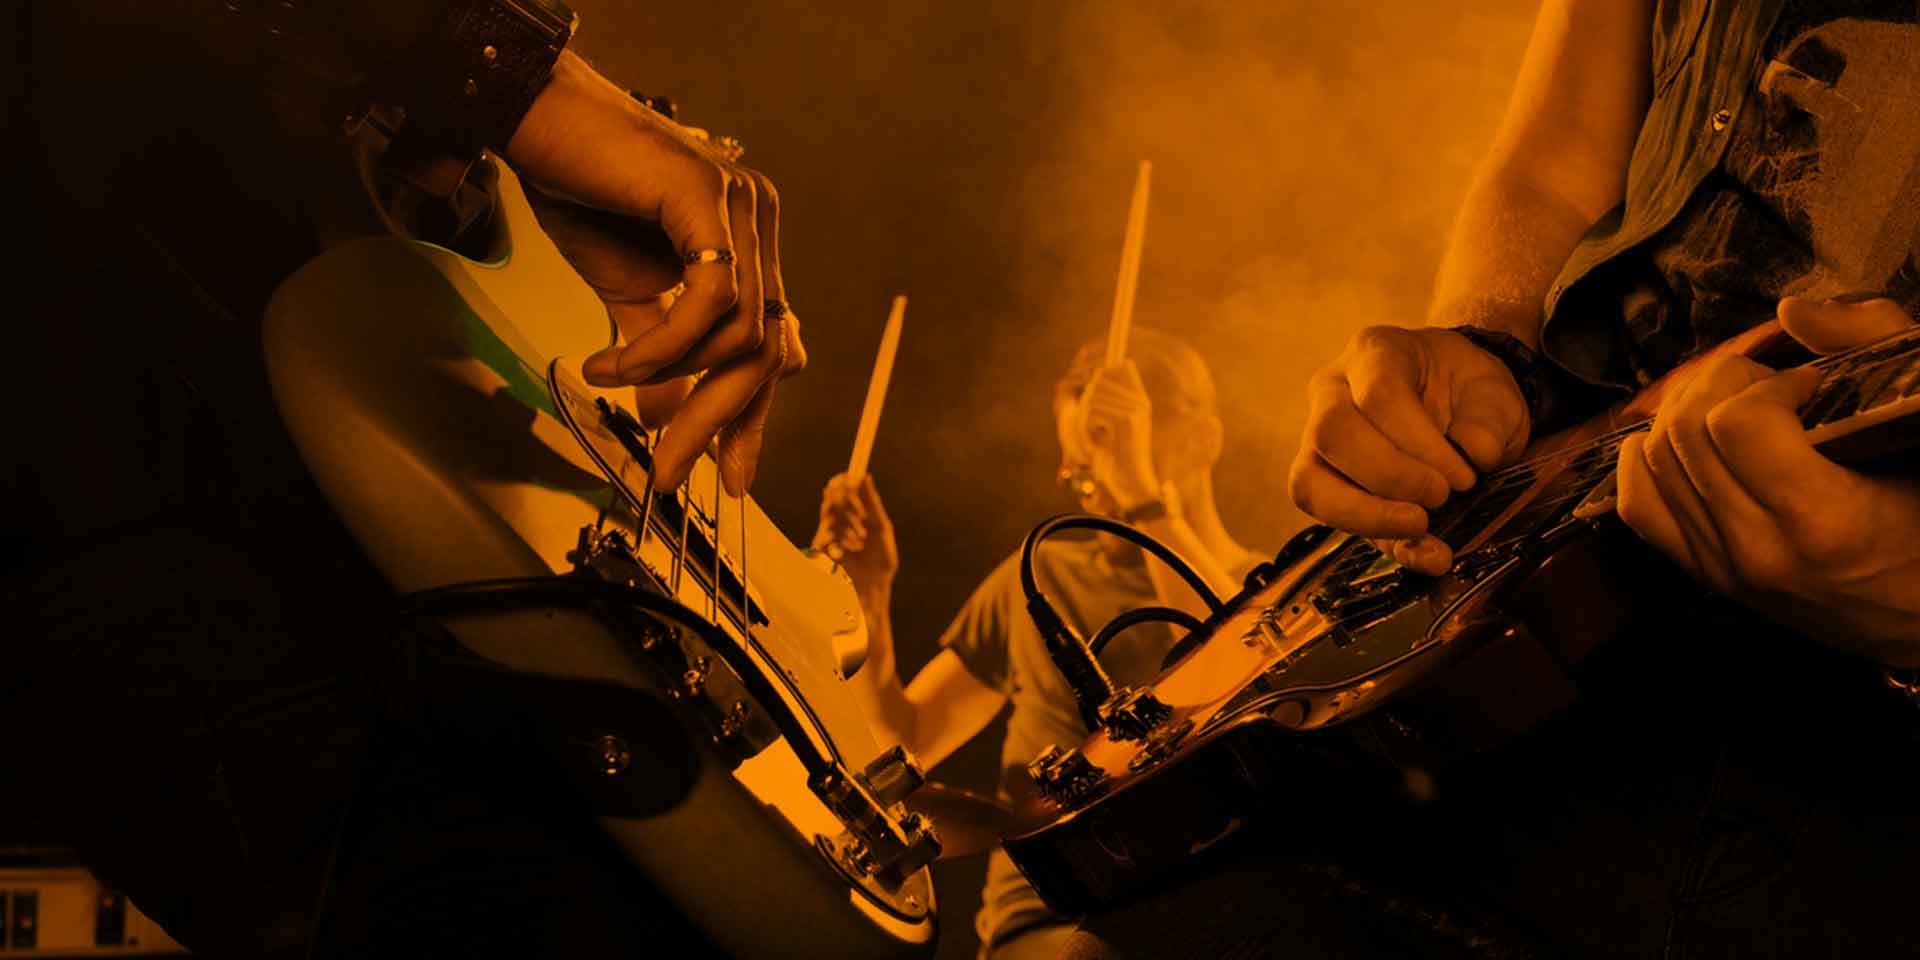 Band members lost in the groove during a smoky and intense live rock performance, their synergy verging on the metaphysical.